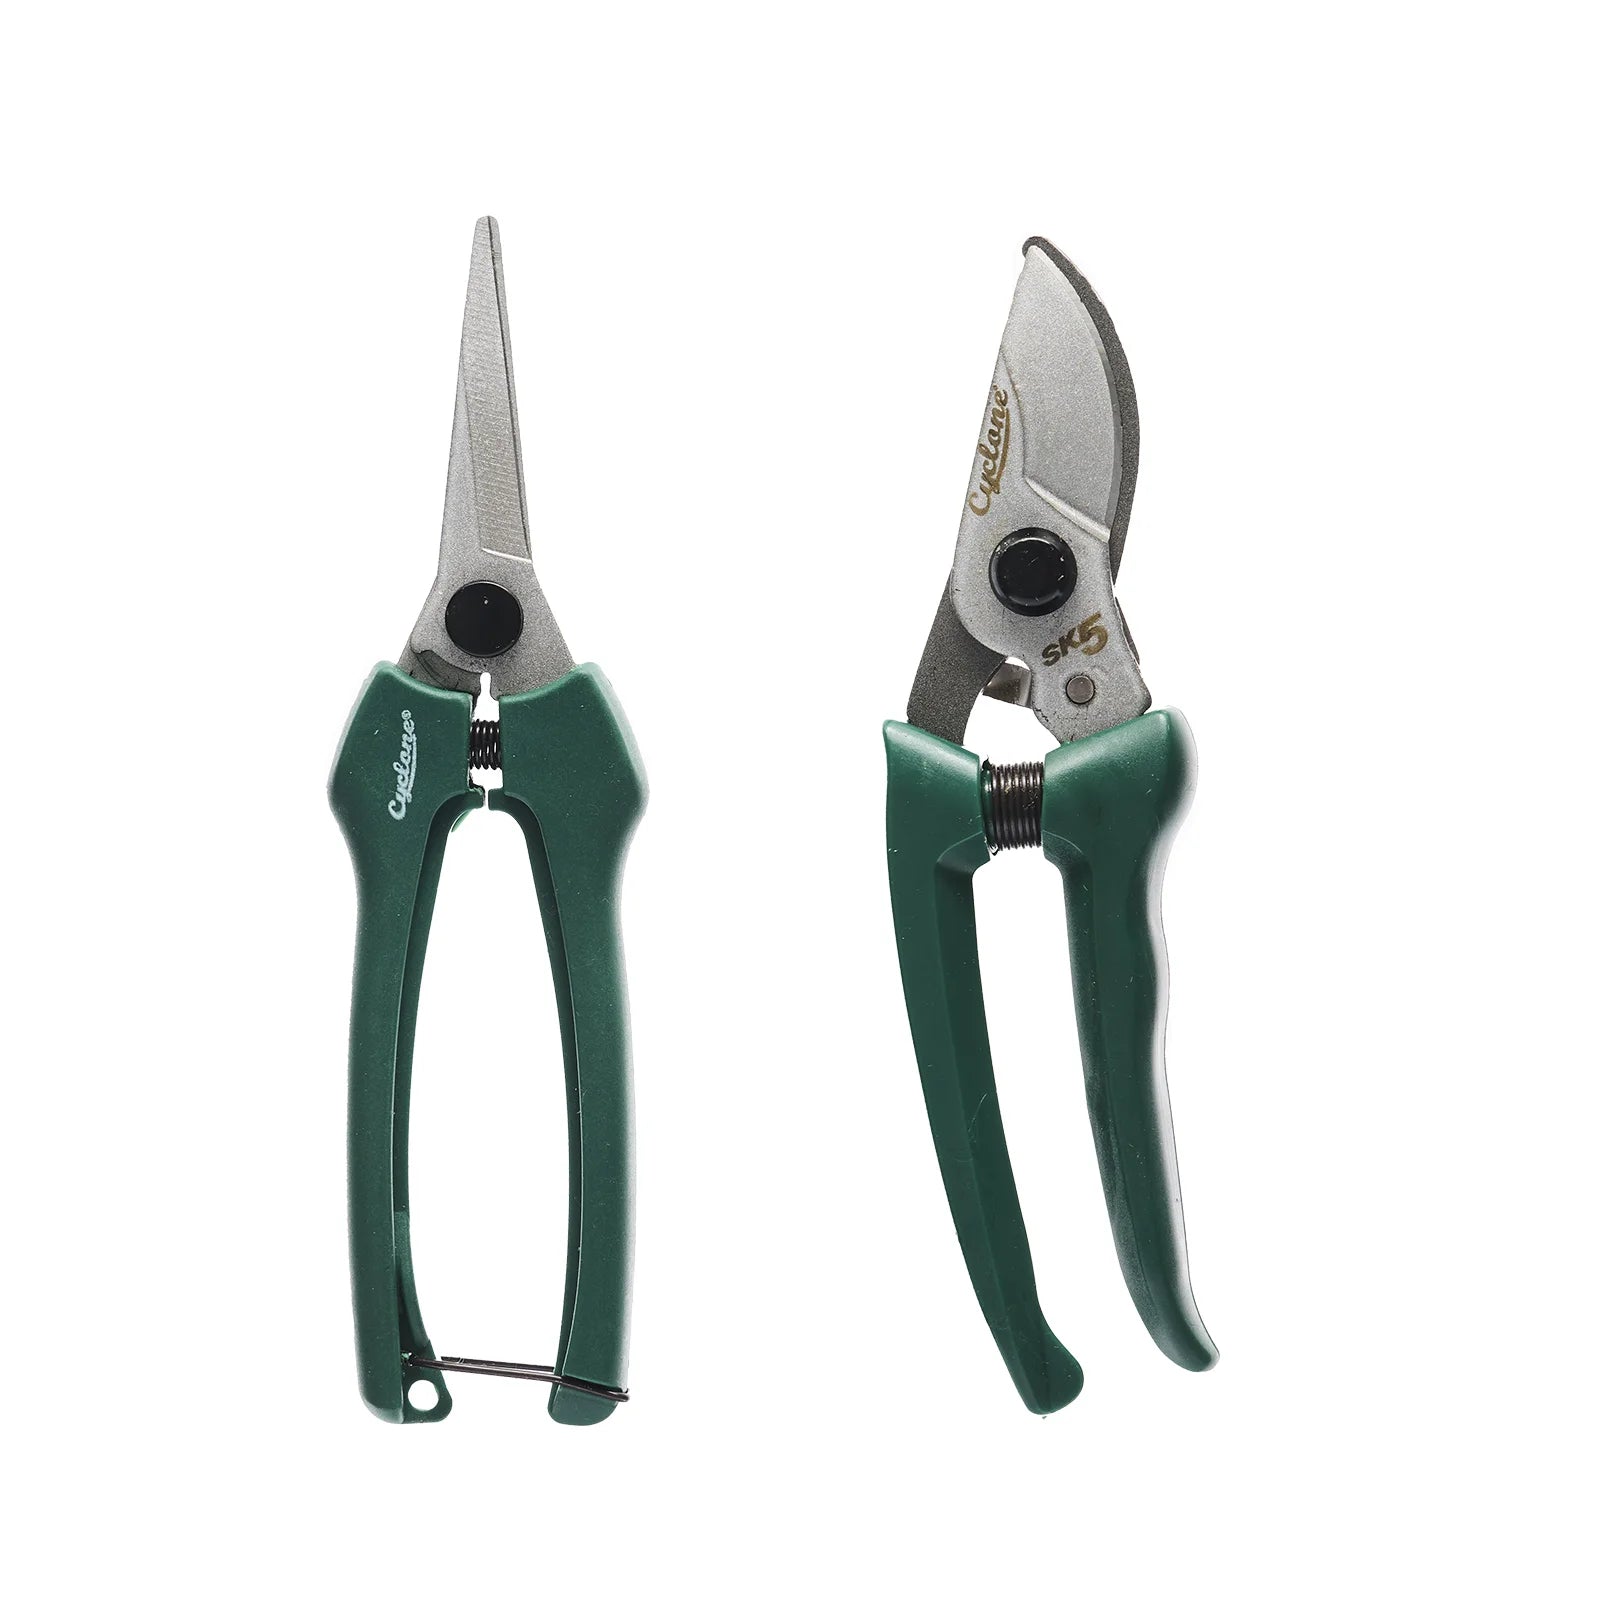 Cyclone Bypass Pruner & Floral Snips Pack - Gro Urban Oasis